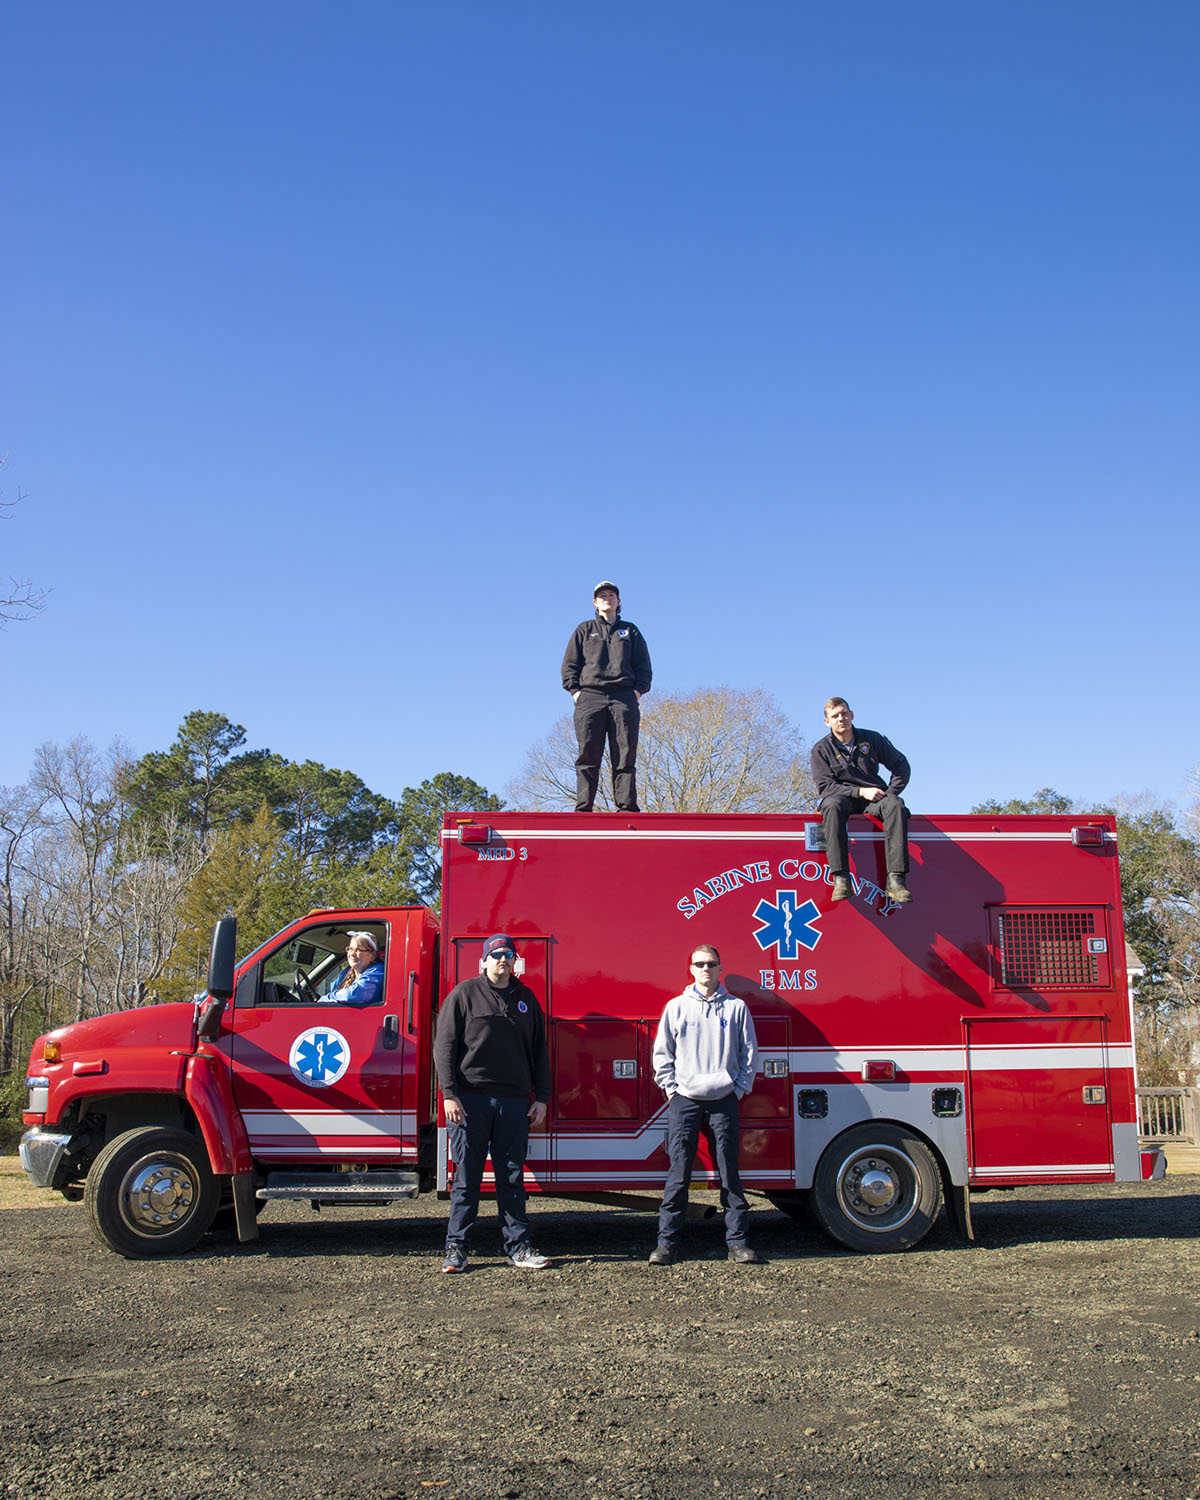 A group of people stand on and around a red ambulance